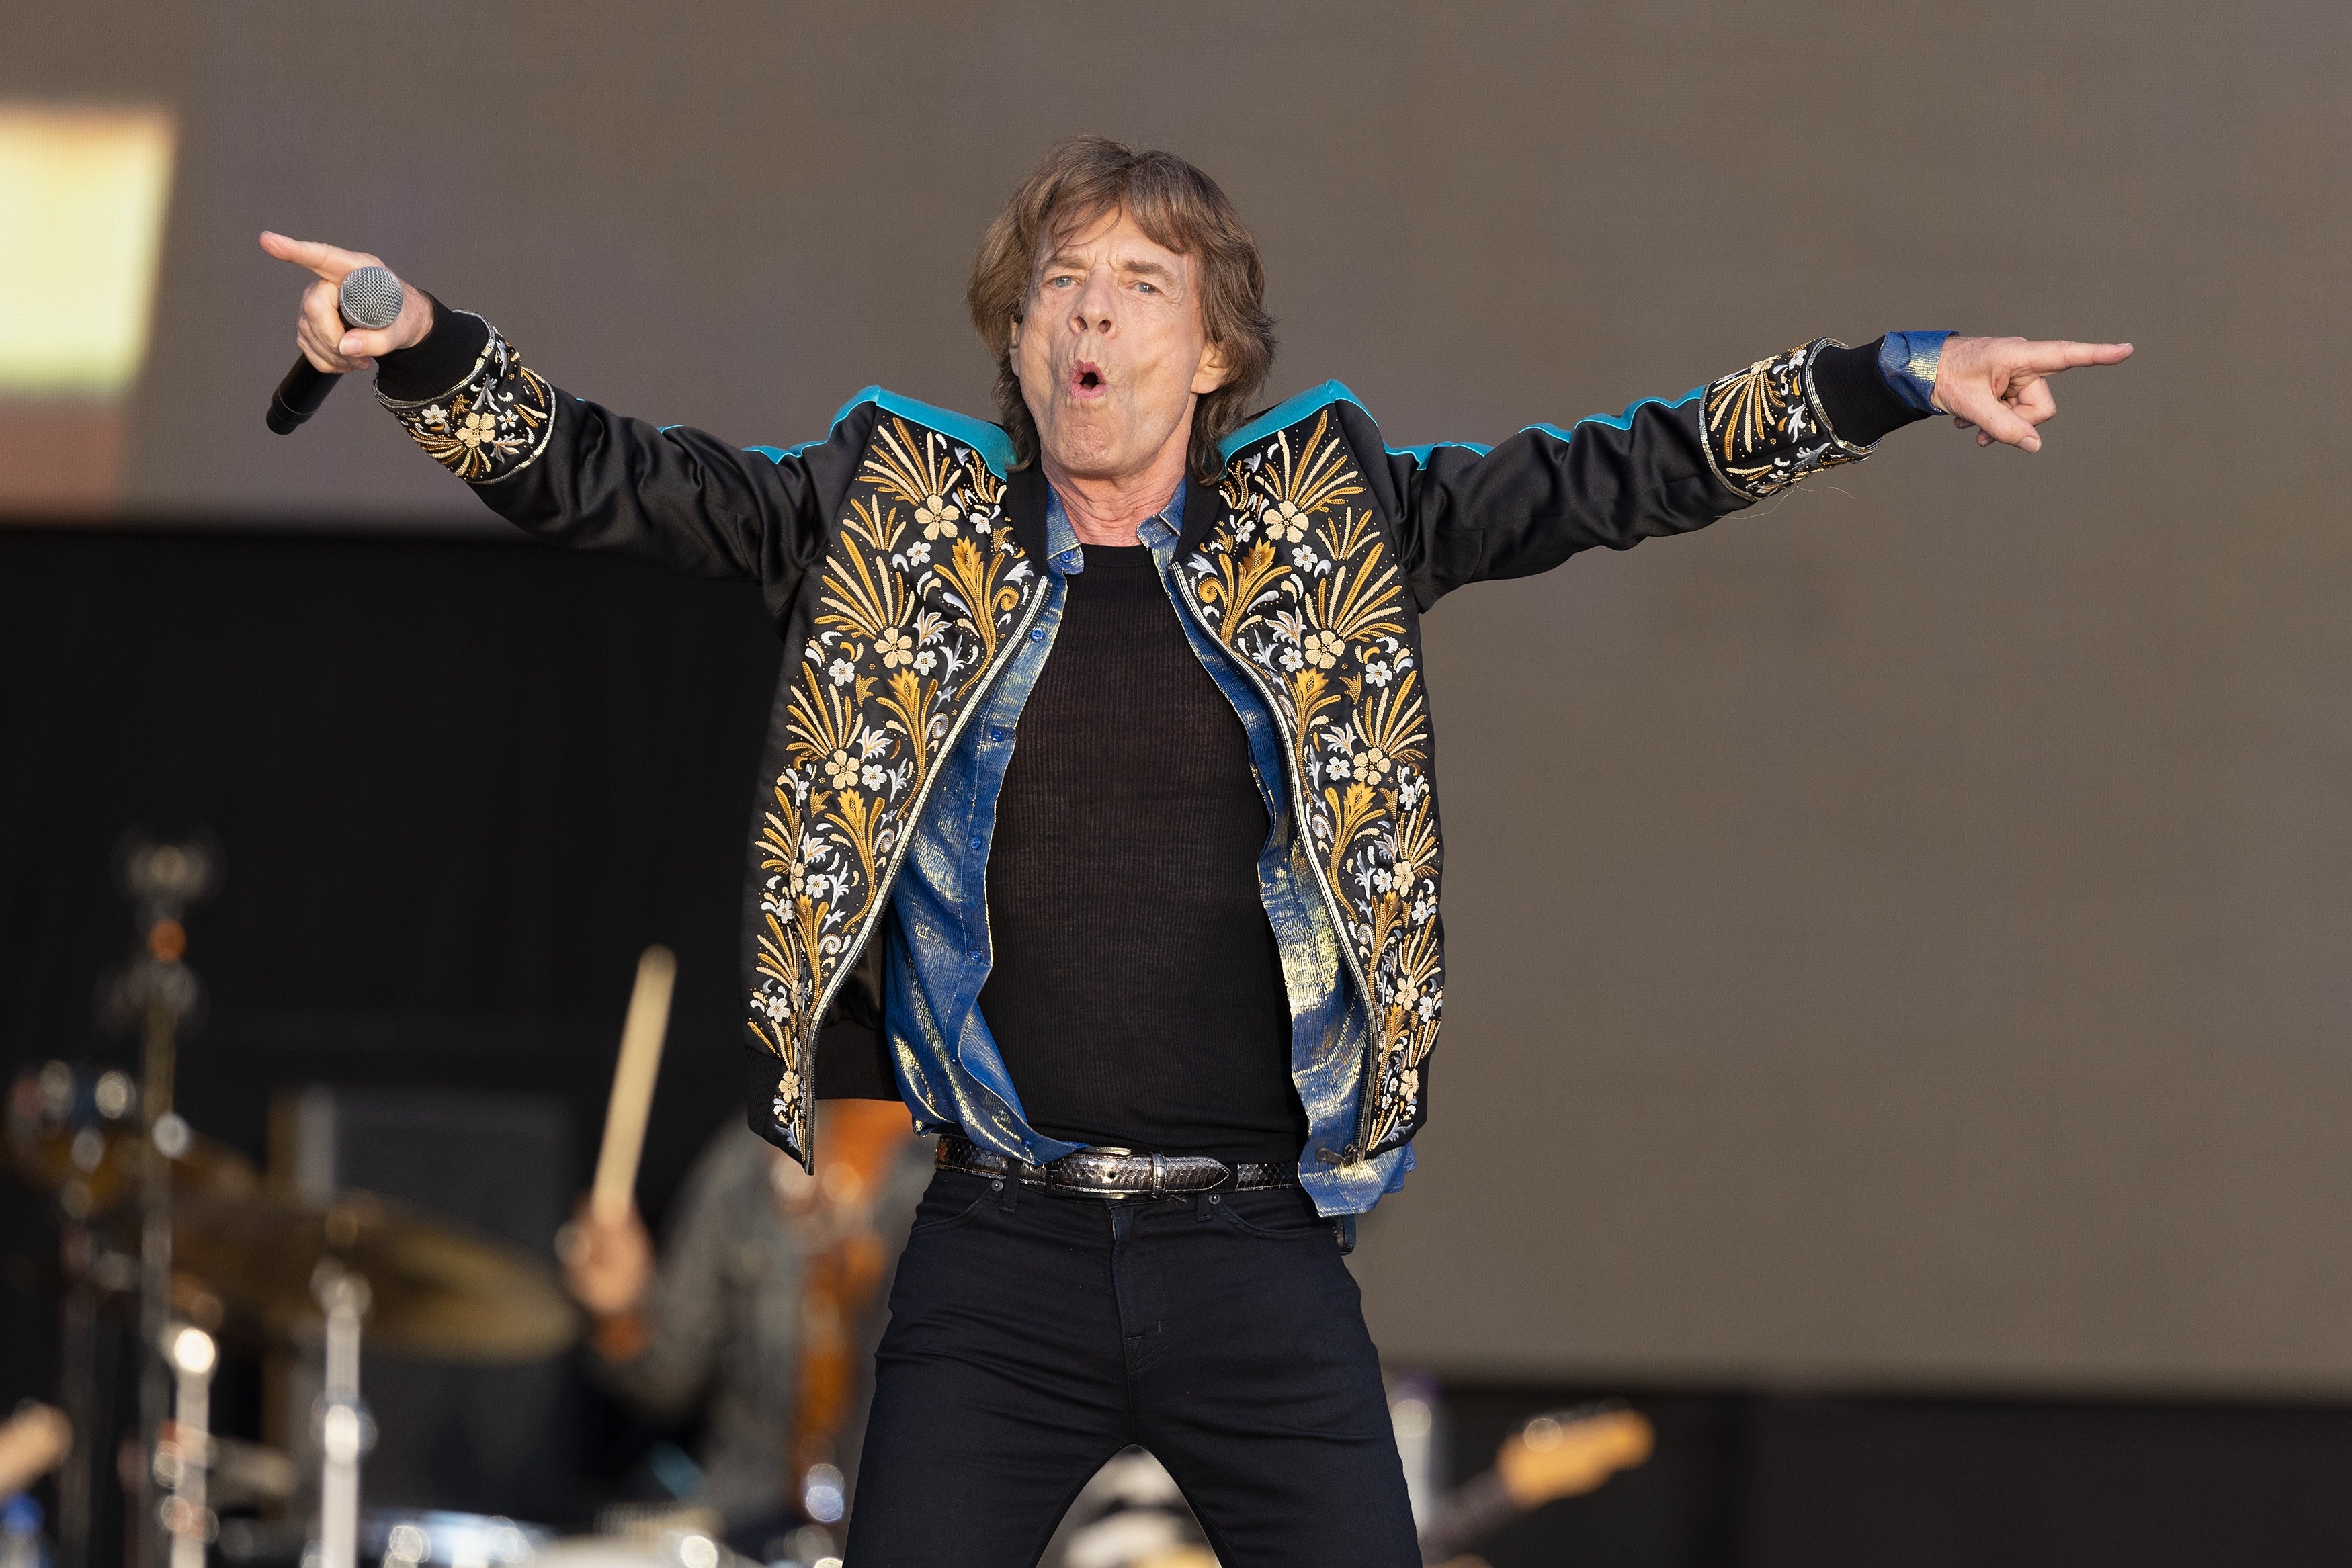 The Rolling Stones in Hyde Park